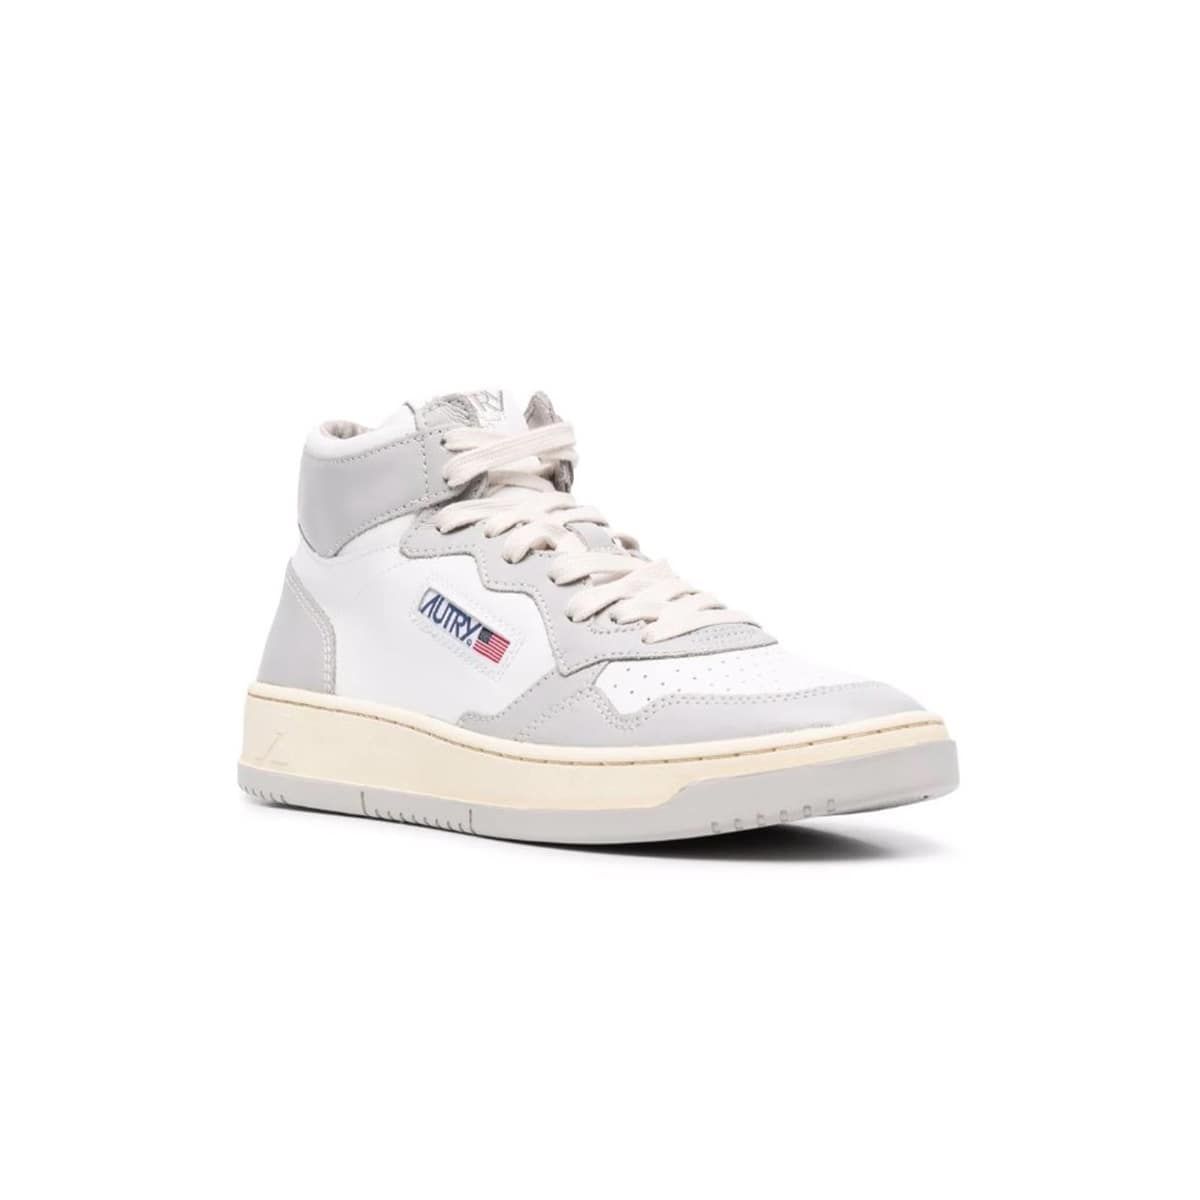 Medalist Mid Sneakers In White & Gray Leather